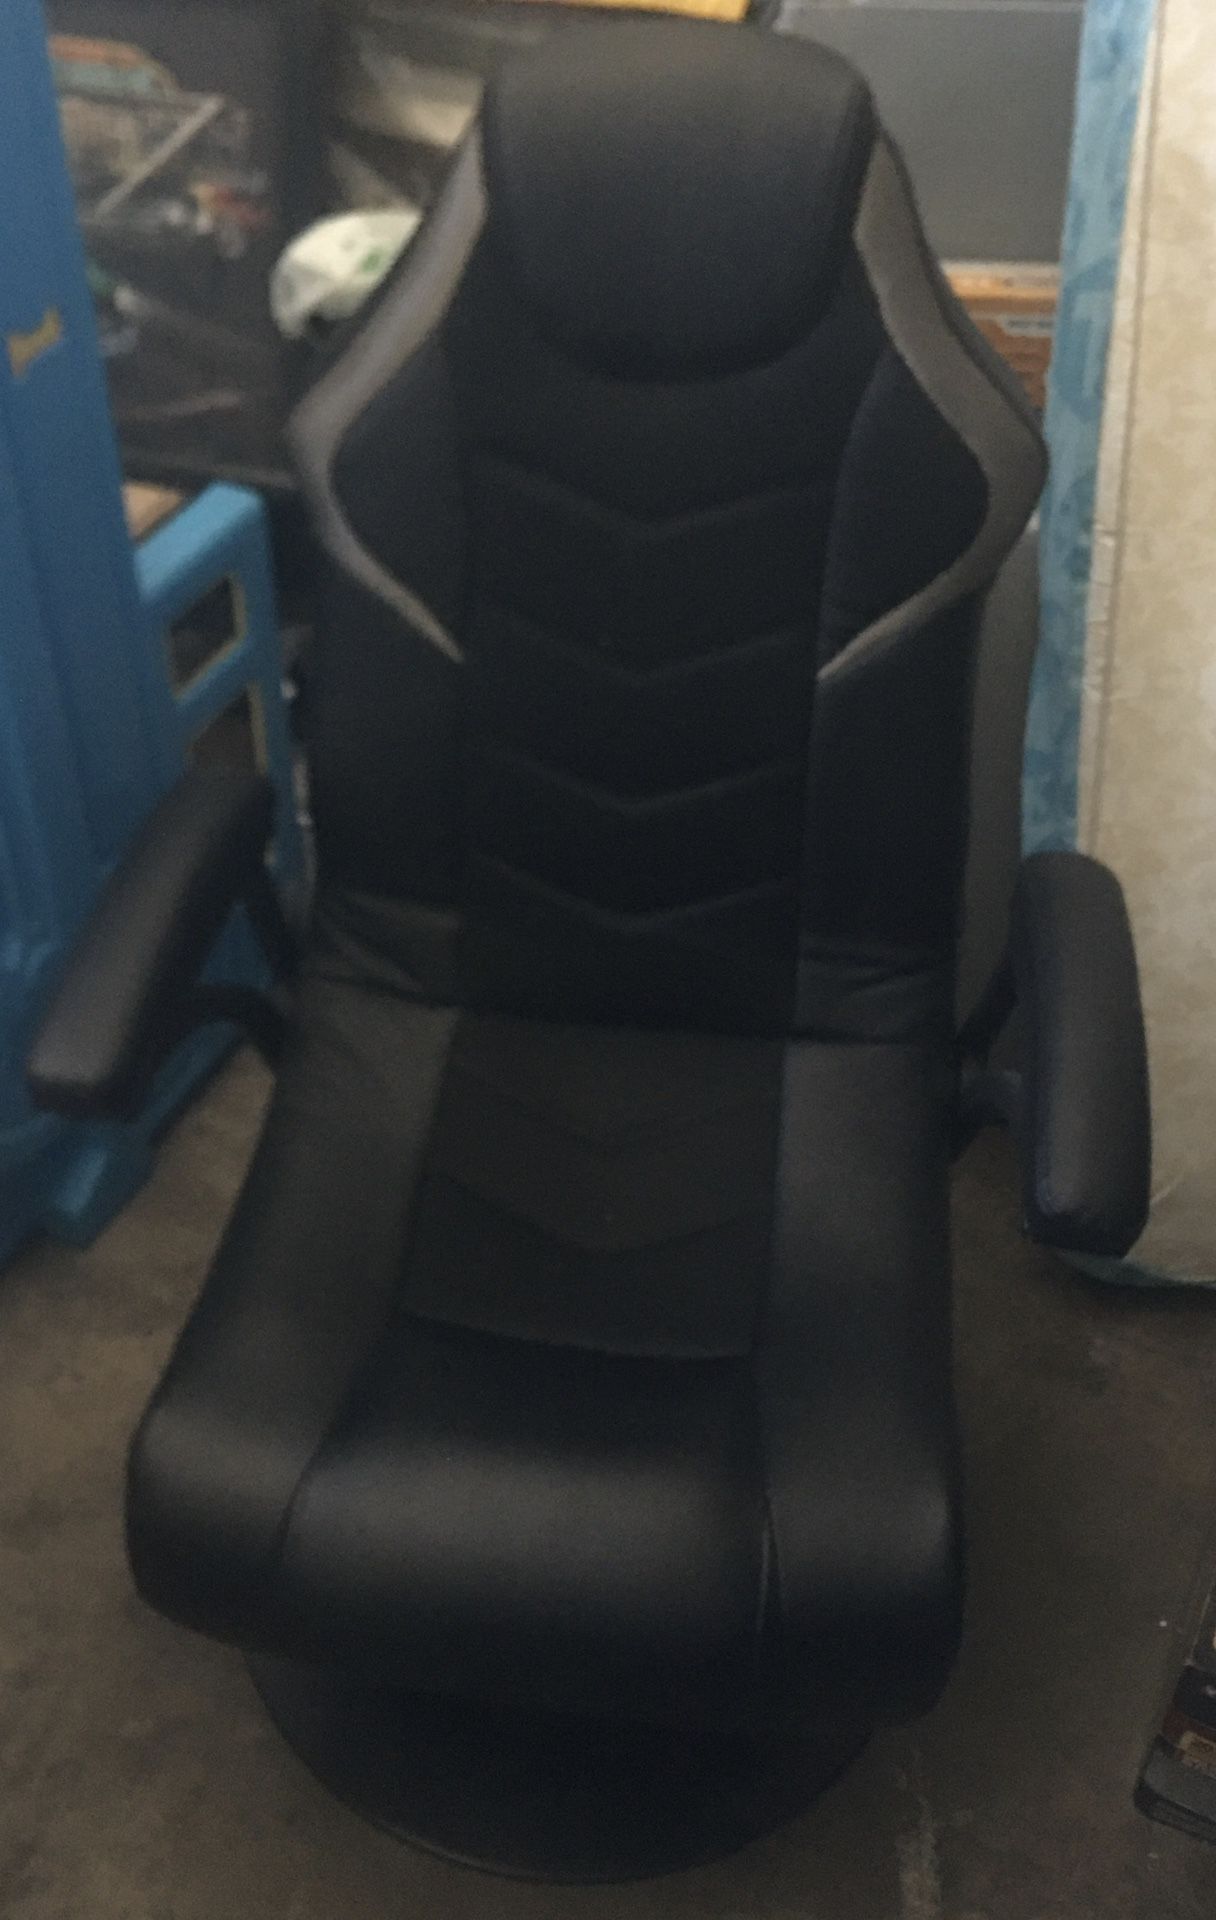 Game Chair